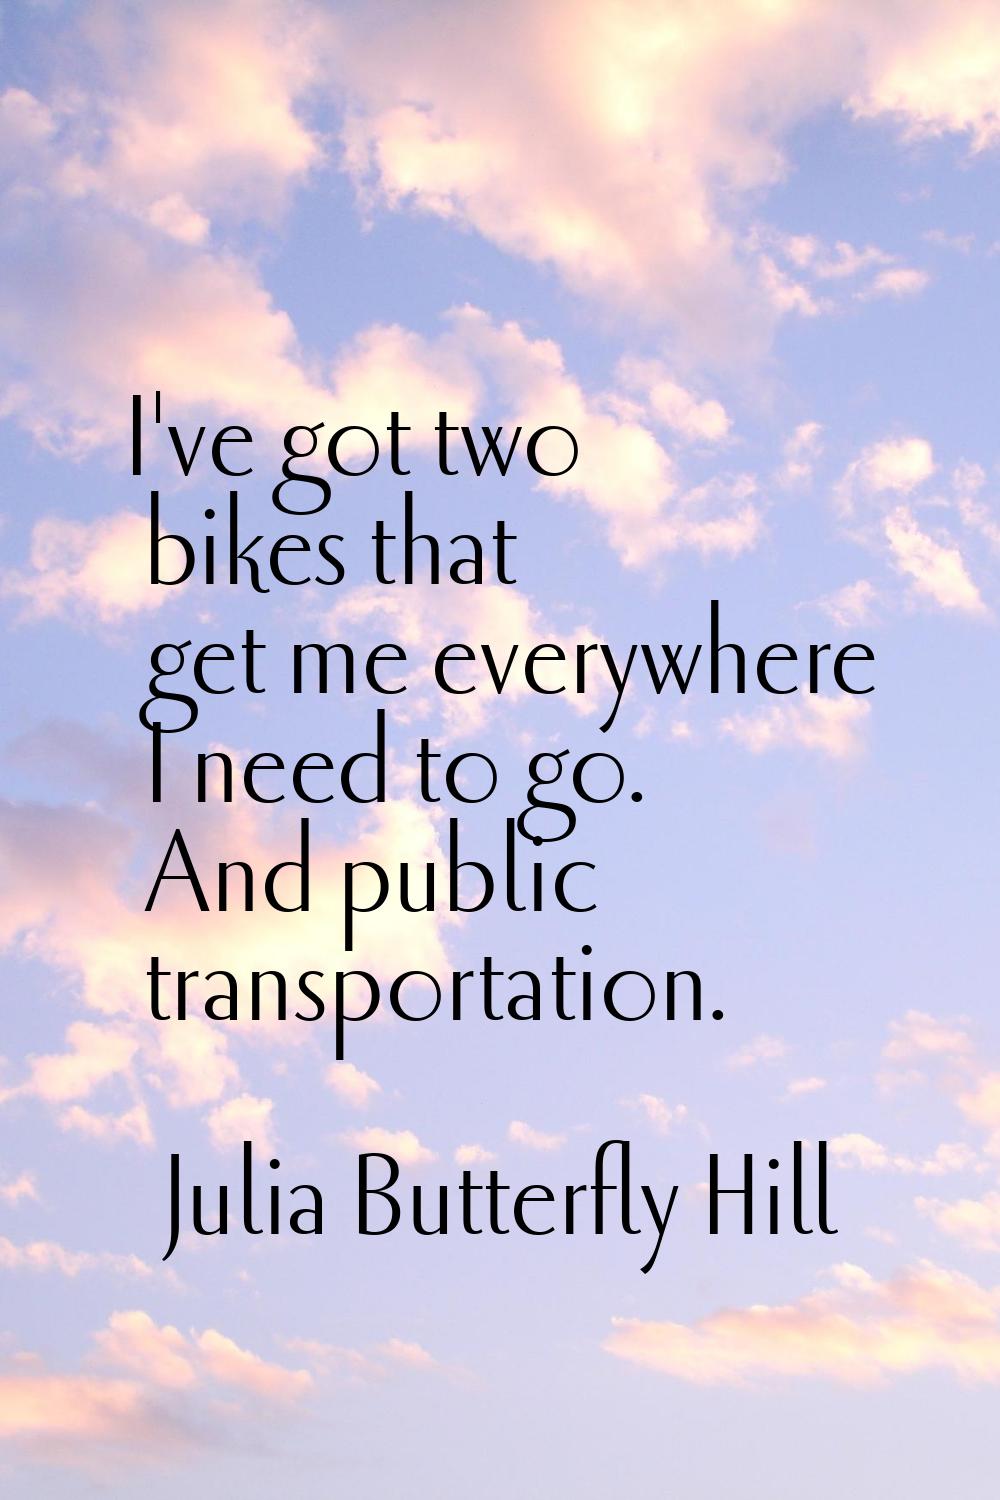 I've got two bikes that get me everywhere I need to go. And public transportation.